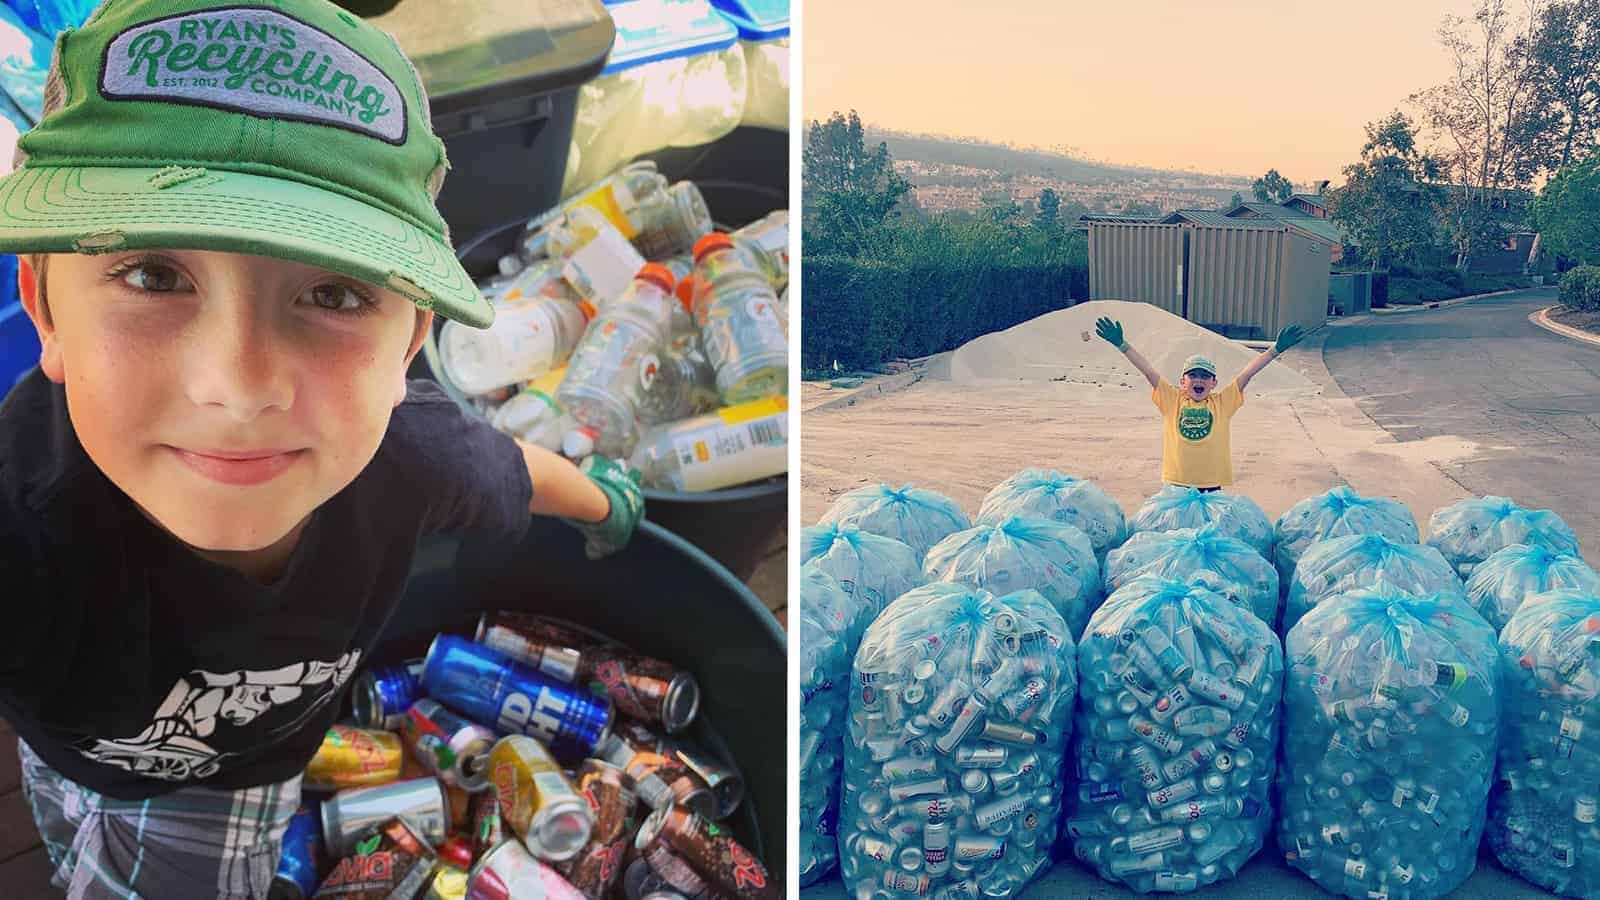 11-year-old Boy in California Runs a Successful Recycling Company